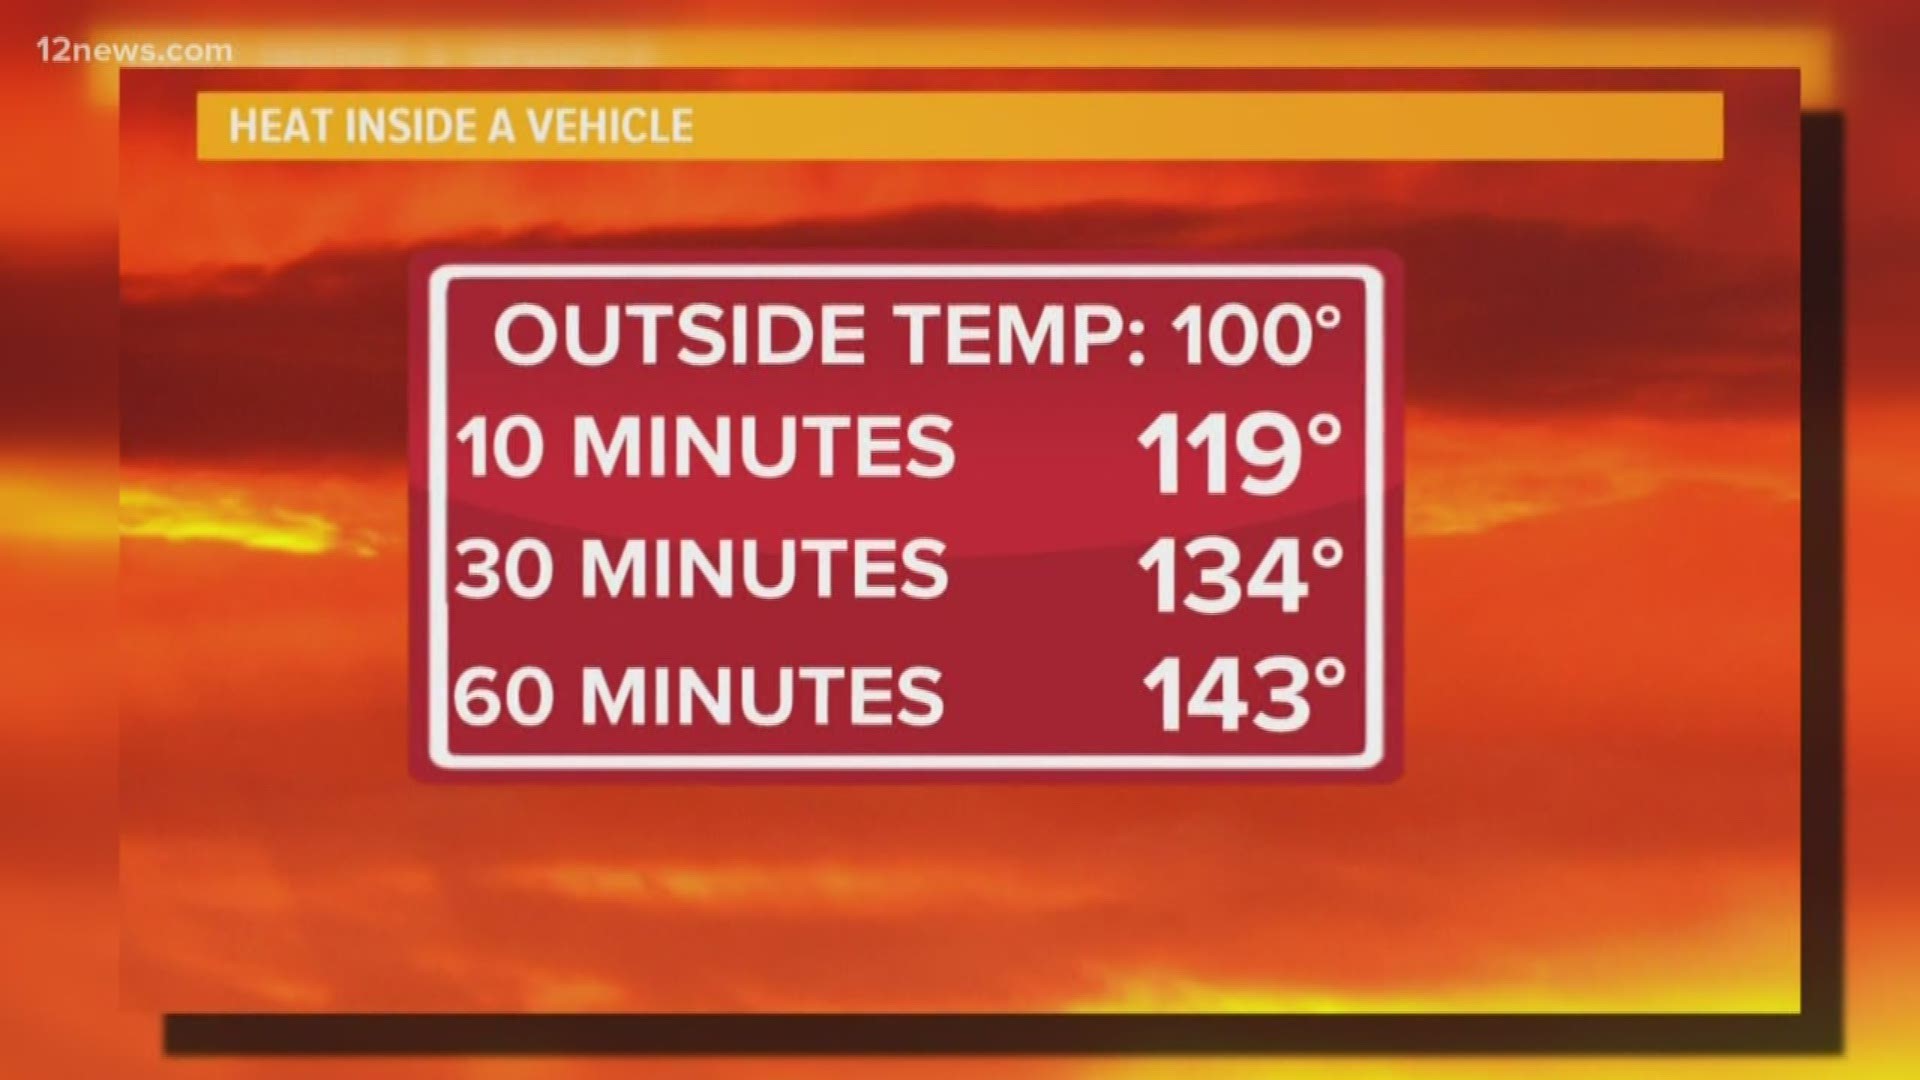 "This is the dangerous heat that will kill children and animals,"  said Phoenix Fire Department Spokesman Rob McDade.